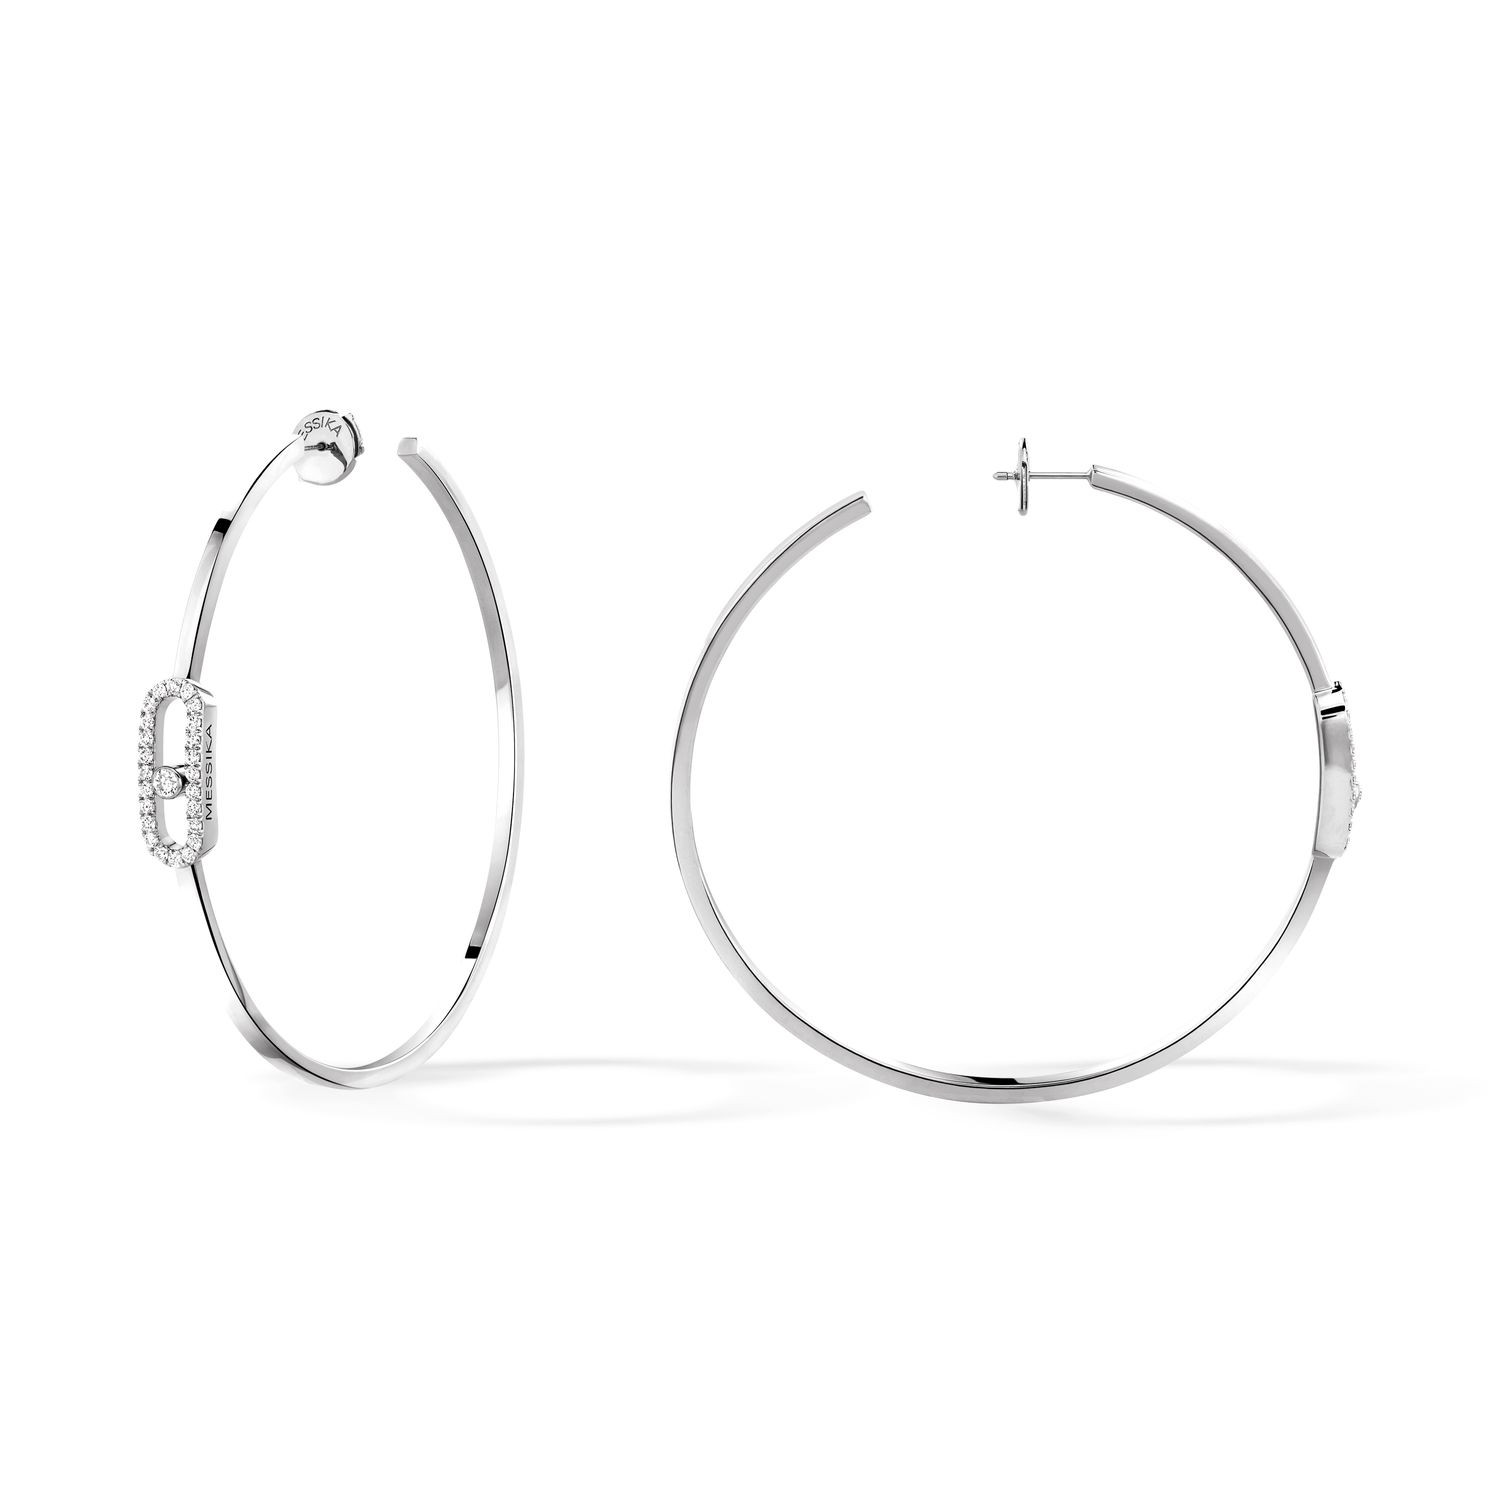 Messika Move Uno Large White Gold Hoop Earrings